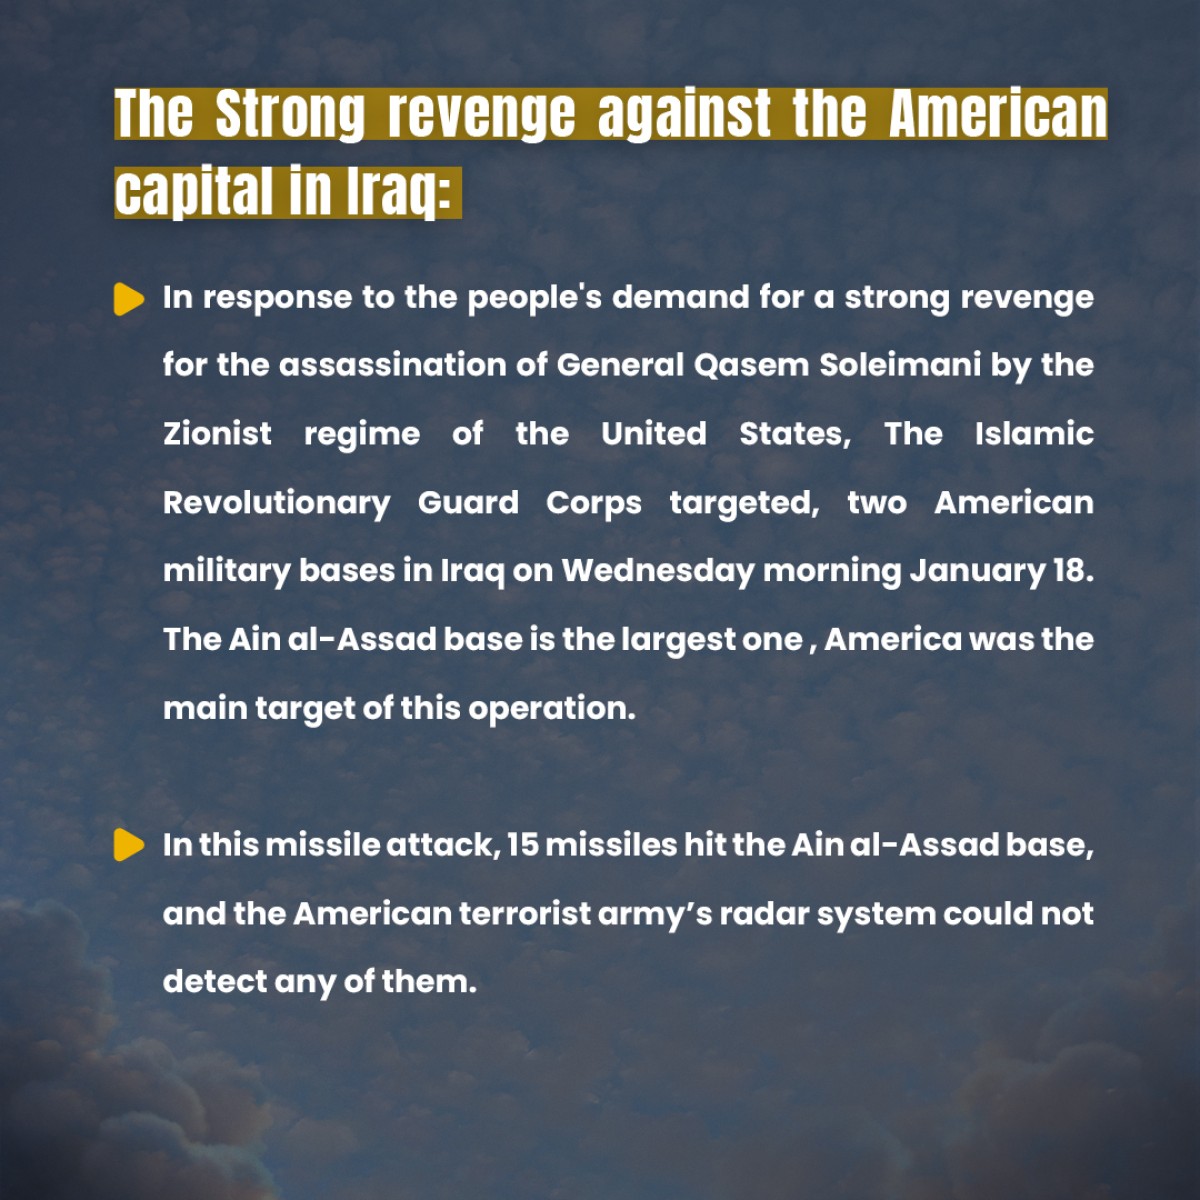 THE STRONG REVENGE AGAINST THE AMERICAN